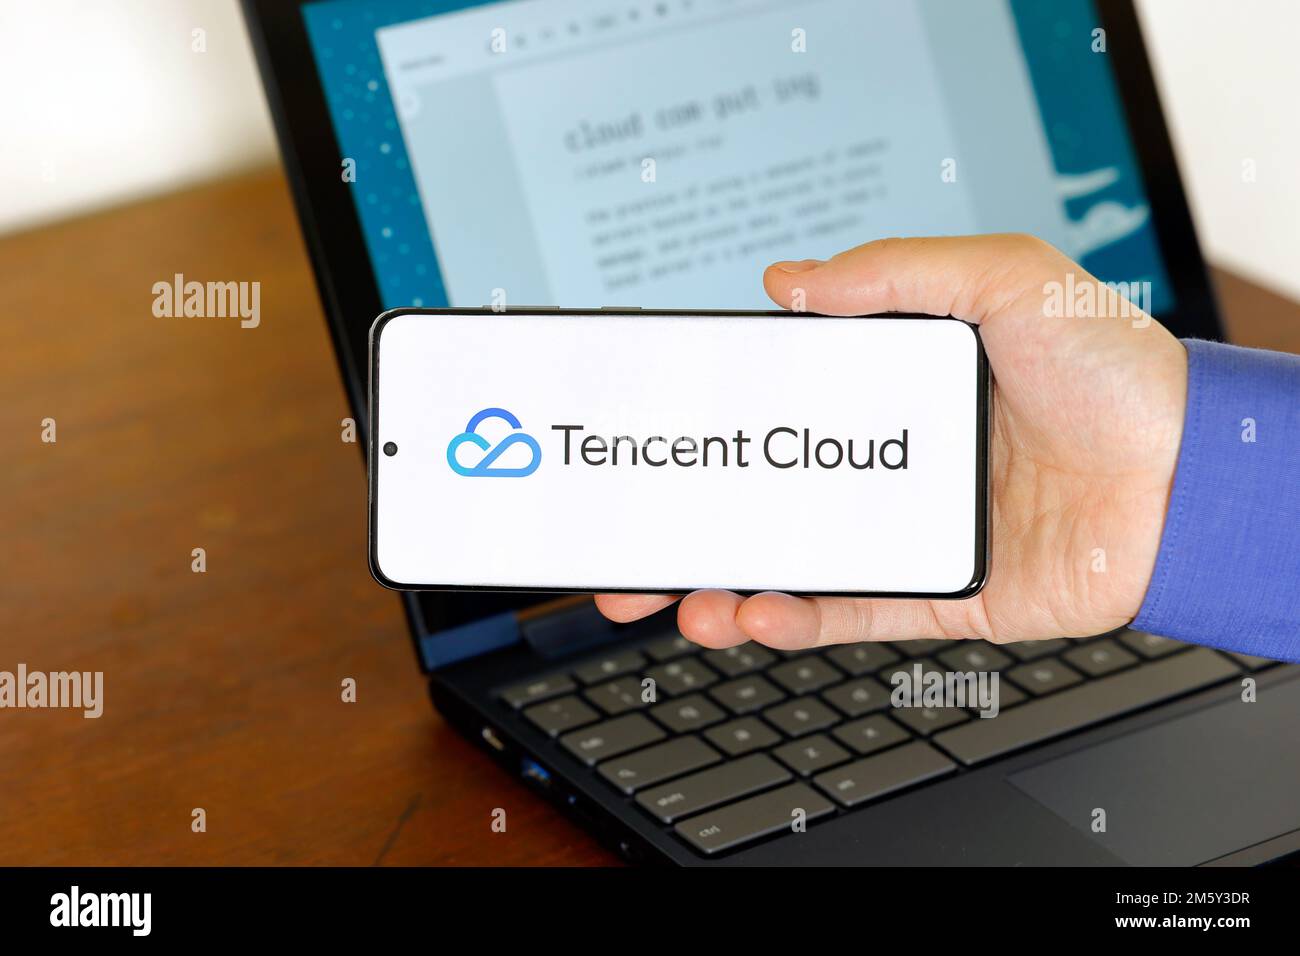 Logo of Tencent Cloud on a smartphone in front of a computer. Tencent Cloud is a cloud computing technology company, a subsidary of Tencent Holdings. Stock Photo